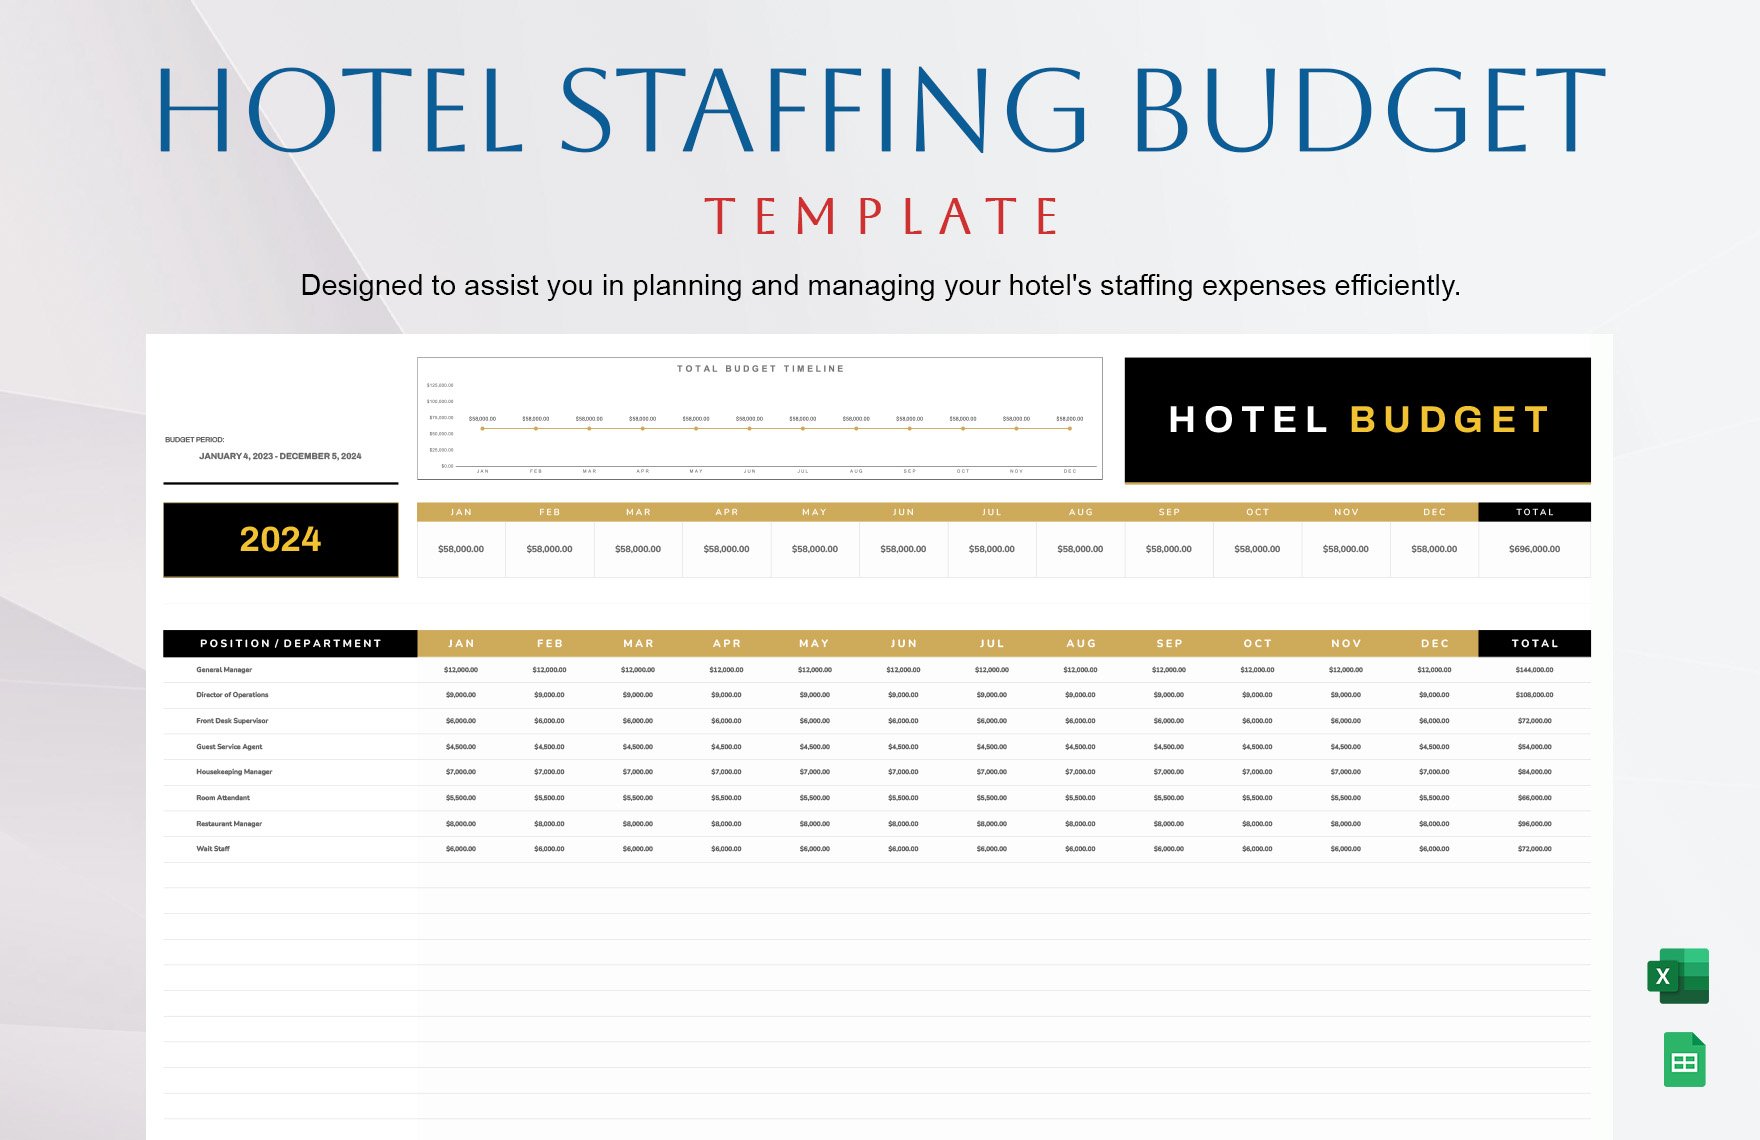 Hotel Staffing Budget Template